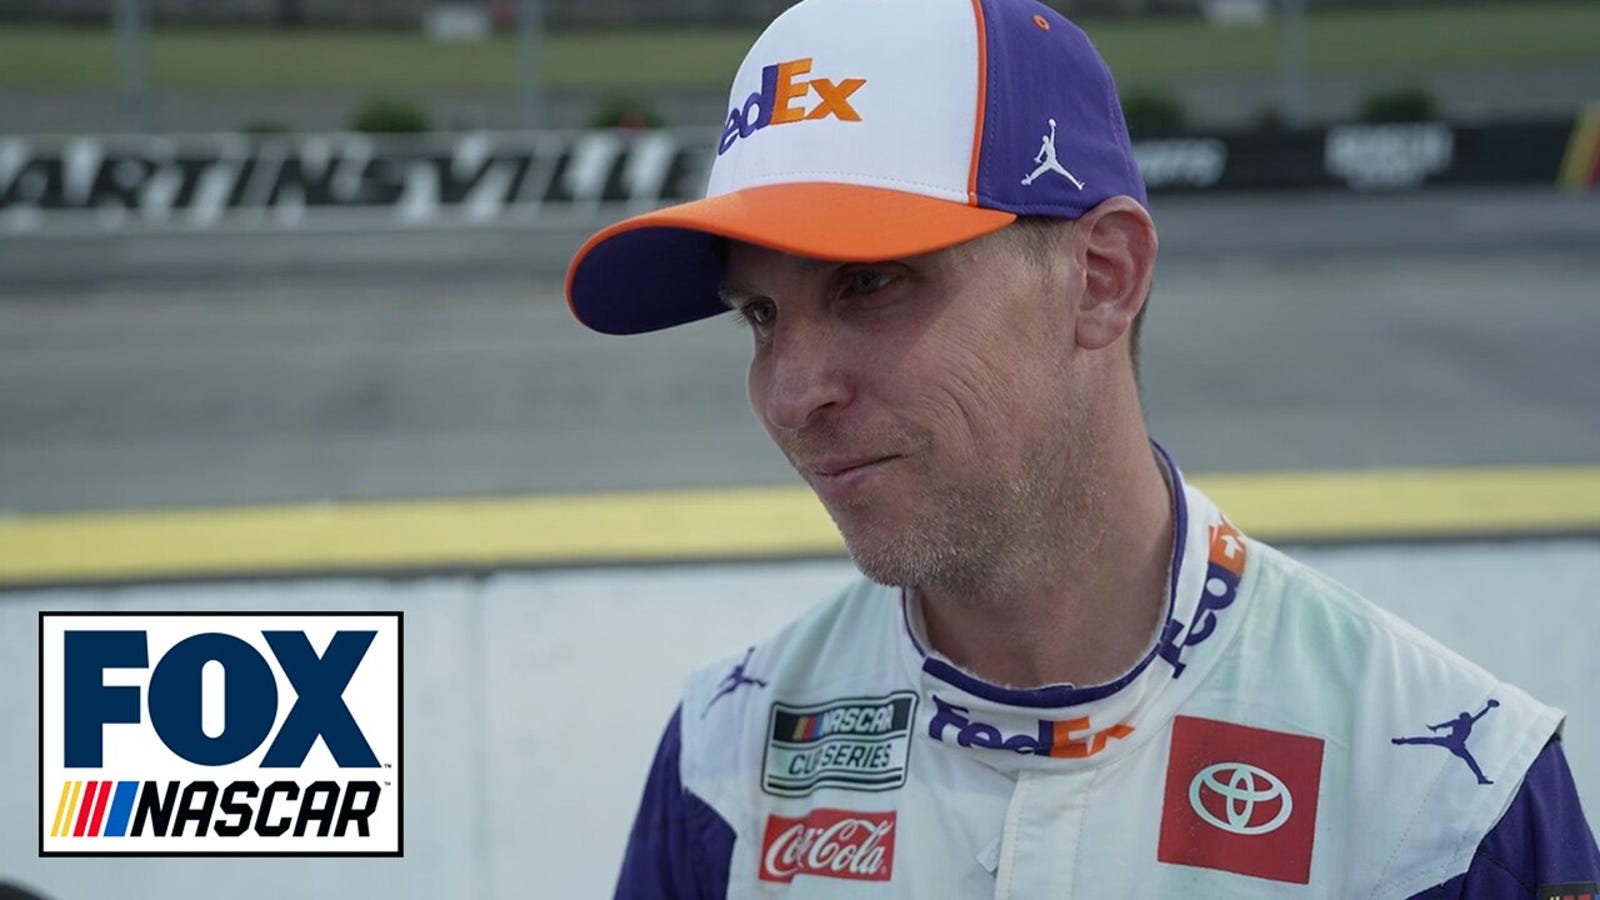 Does Denny Hamlin think a championship is in the cards for him?